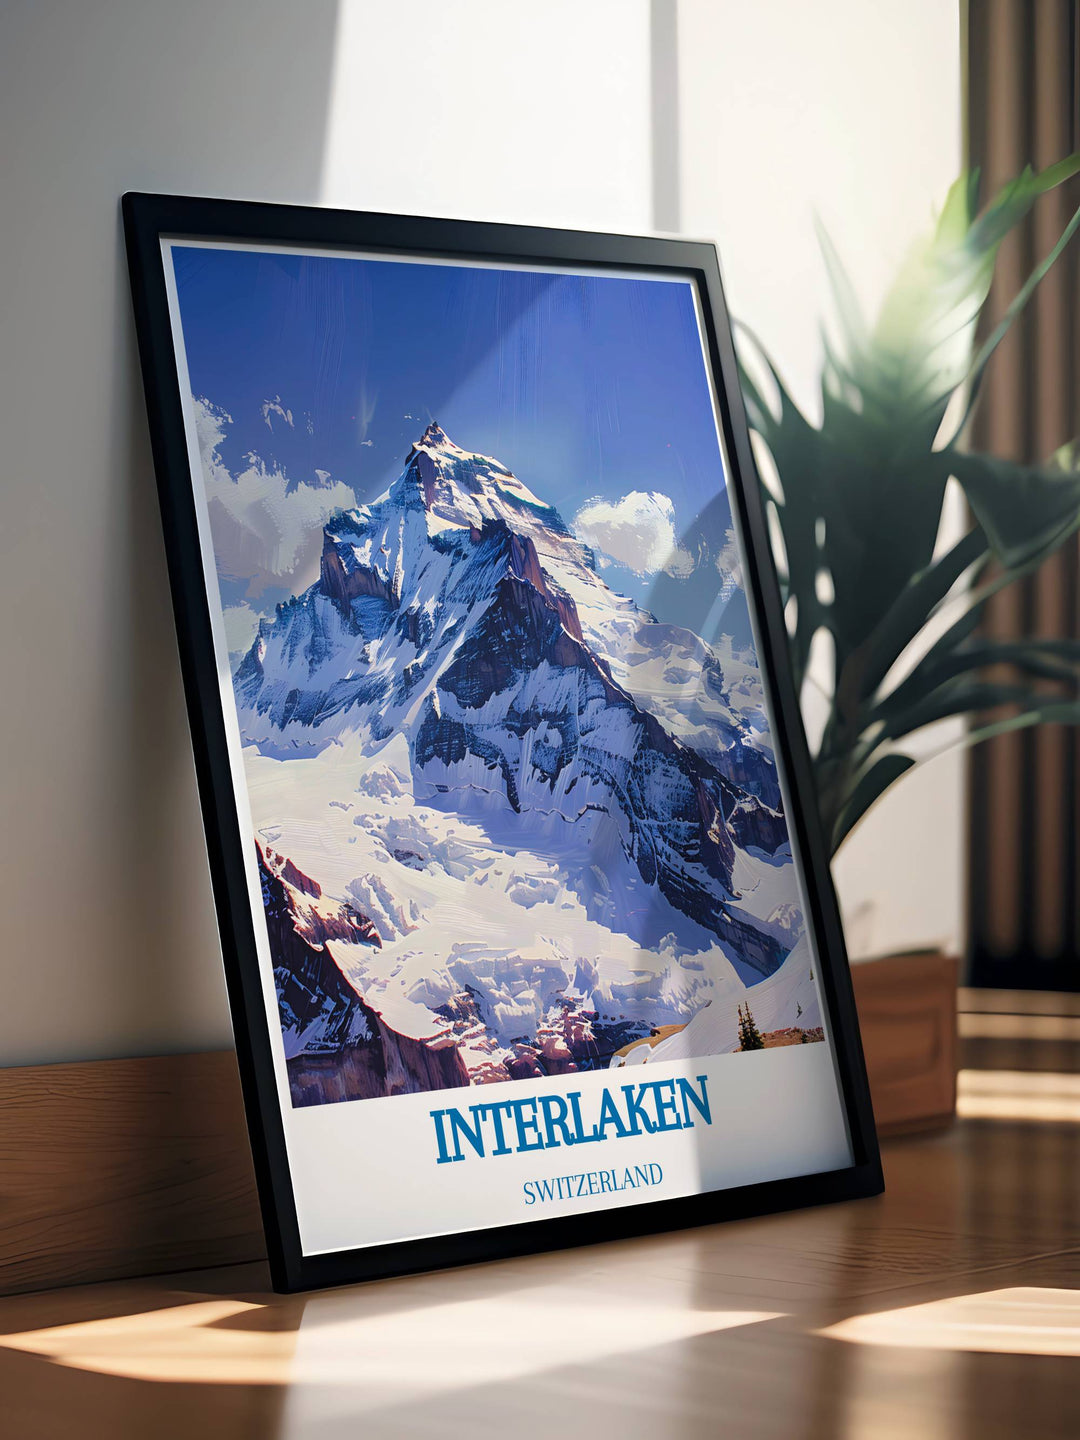 Home decor print showing a panoramic view of Jungfrau, ideal for bringing the beauty of Swiss mountains into your living space